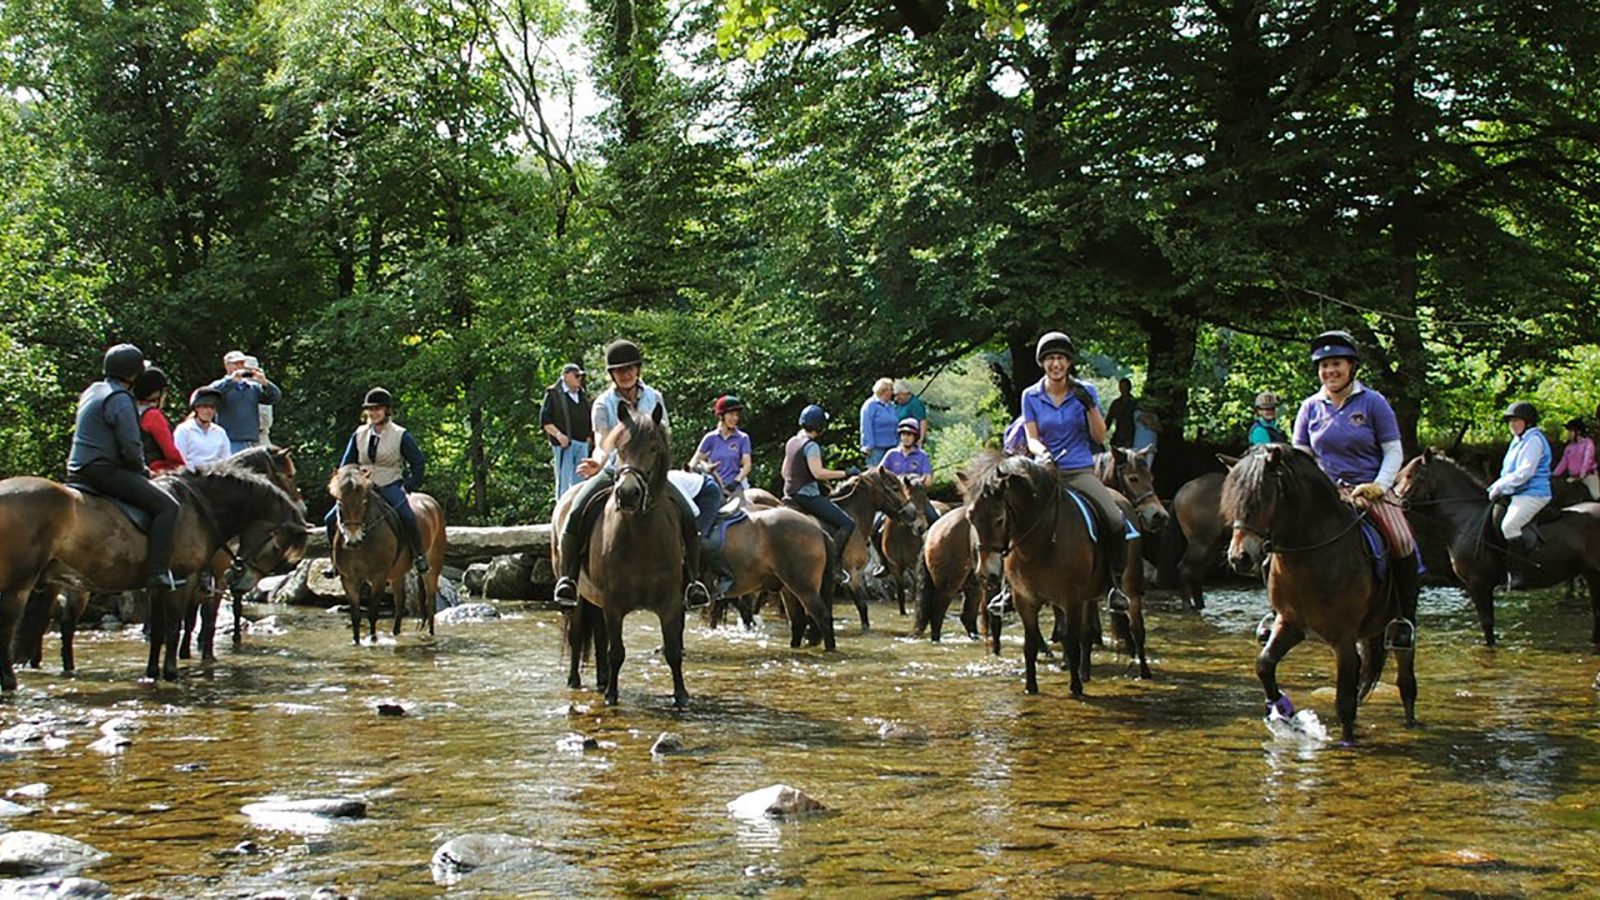 Friends of The Exmoor Pony Society - Passports/registrations